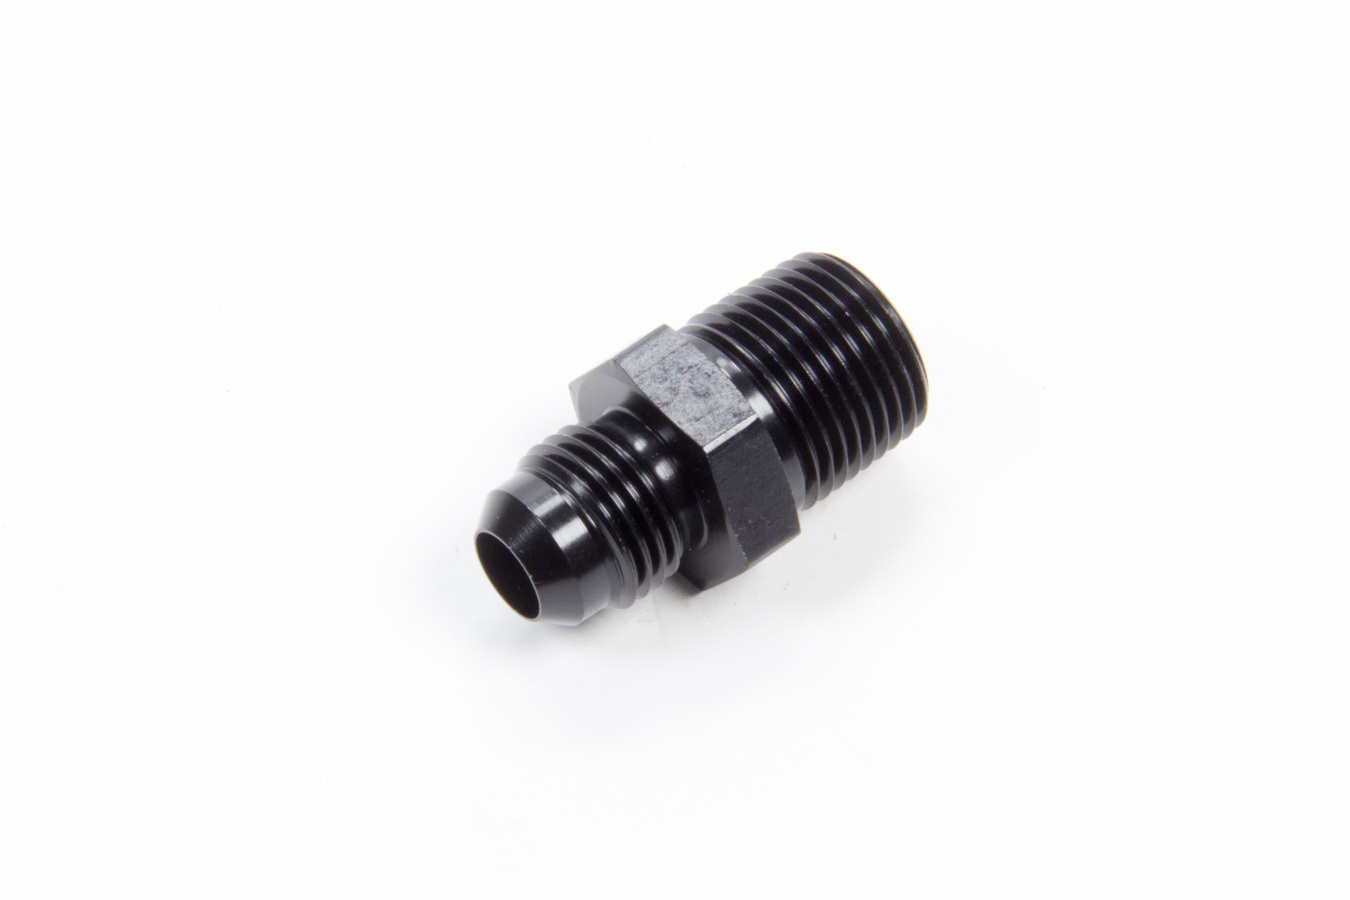 Aeroquip FCM5005 Fitting, Adapter, Straight, 6 AN Male to 3/8 in NPT Male, Aluminum, Black Anodized, Each